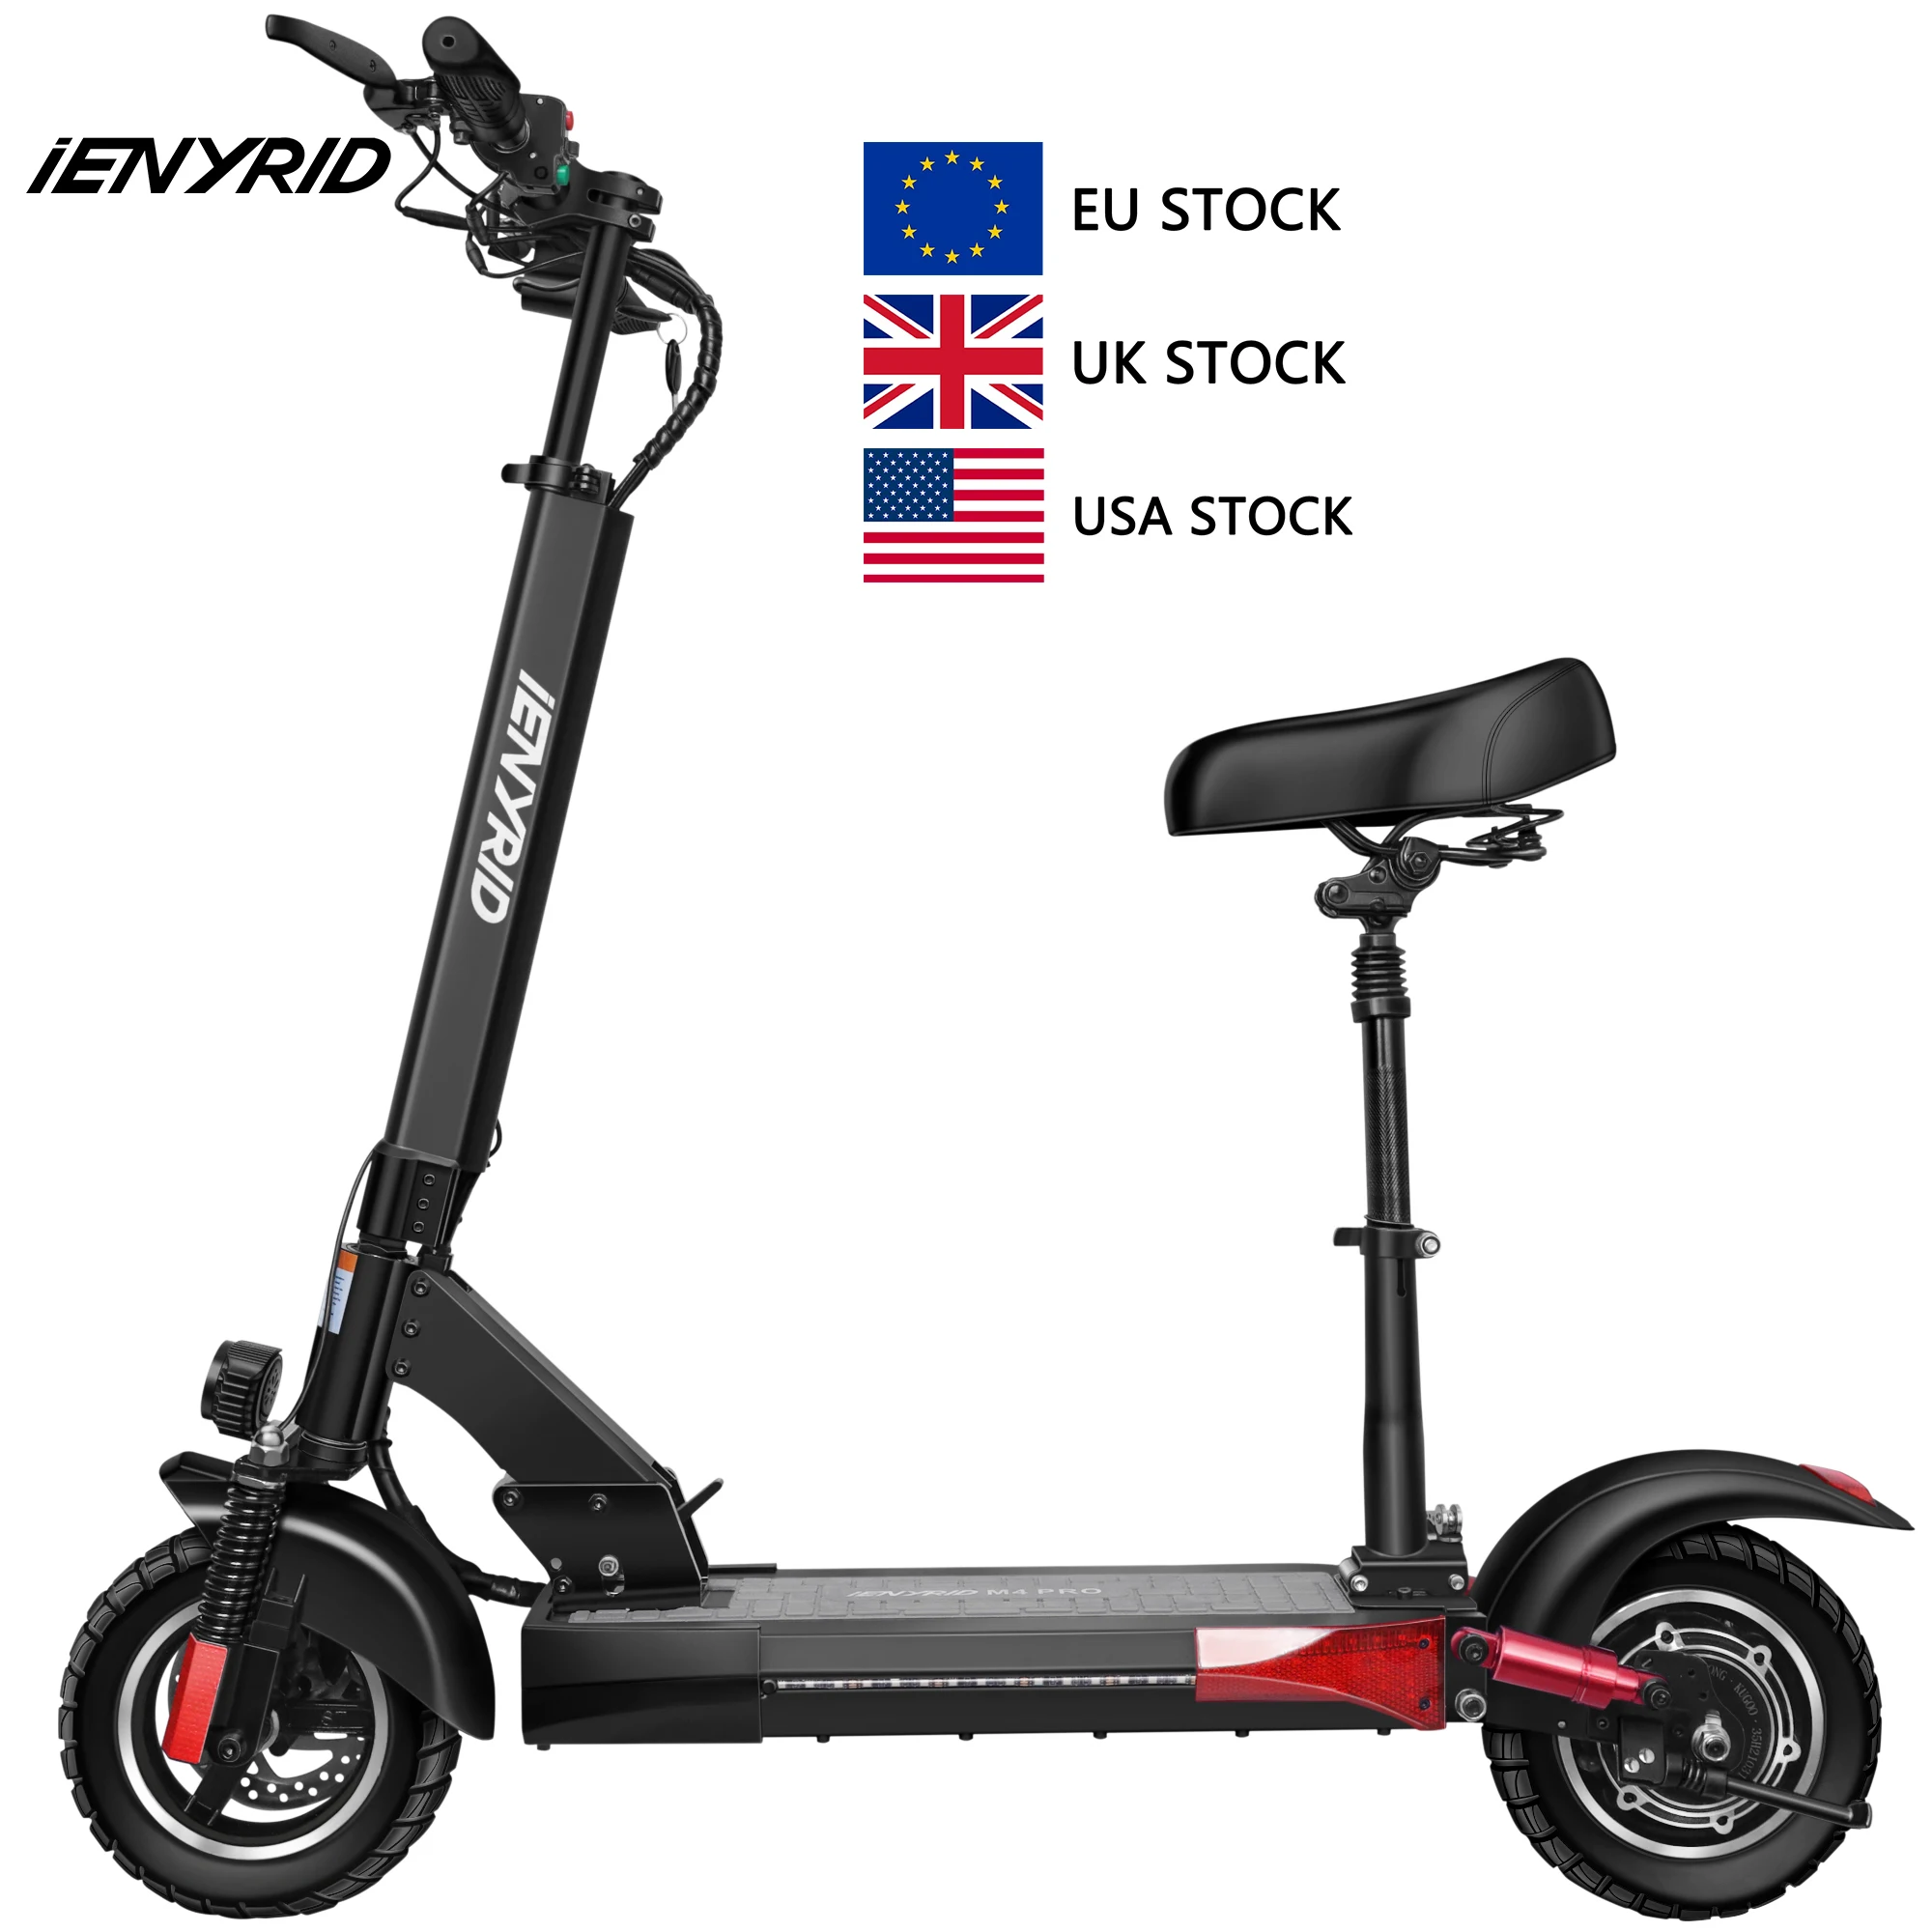 Europe Eu Poland Warehouse iENYRID M4 Pro electric off road scooter 45KM/H Escooter Foot Kick Scooters Moto Electric Motorcycle